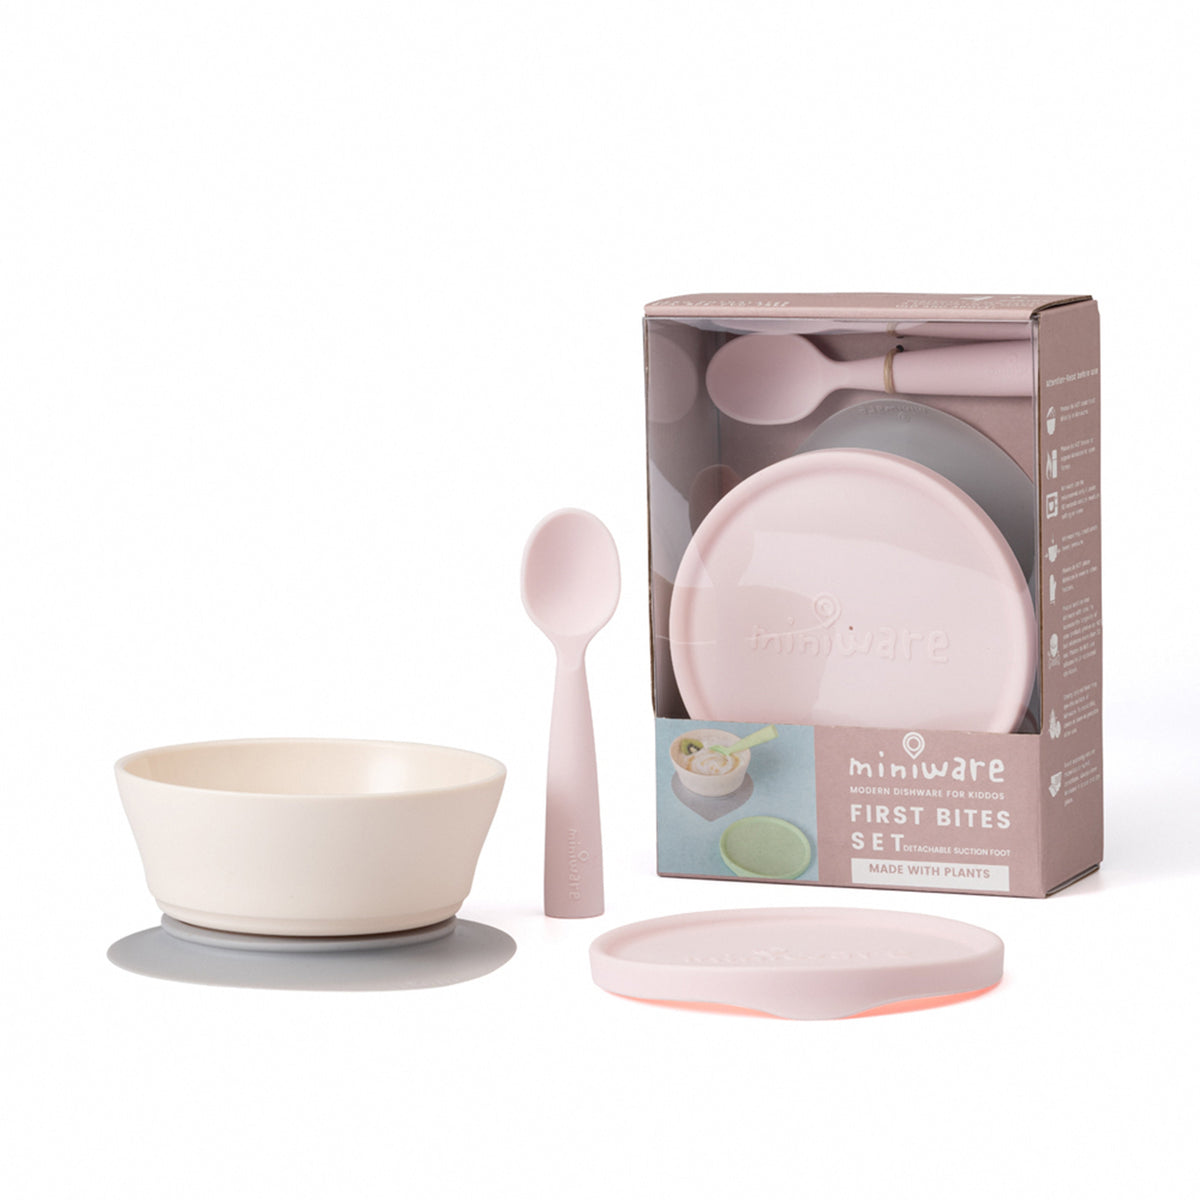 miniware-first-bite-set-pla-cereal-suction-bowl-vanilla-+-silicone-spoon-and-cover-in-cotton-candy- (1)